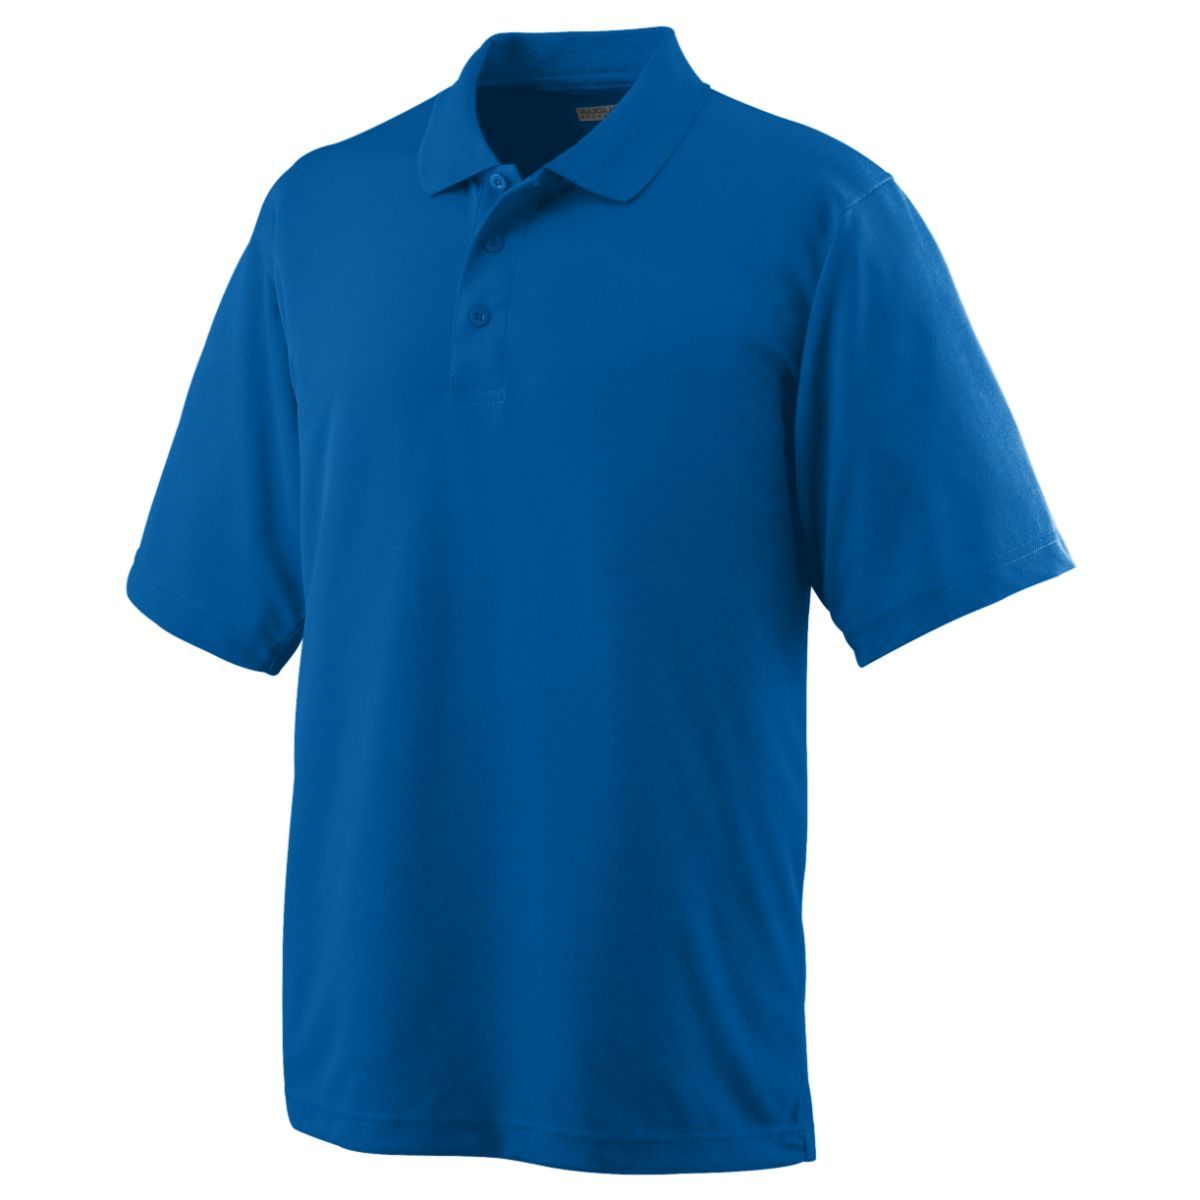 Augusta Sportswear Wicking Mesh Polo in Royal  -Part of the Adult, Adult-Polos, Polos, Augusta-Products, Tennis, Shirts product lines at KanaleyCreations.com